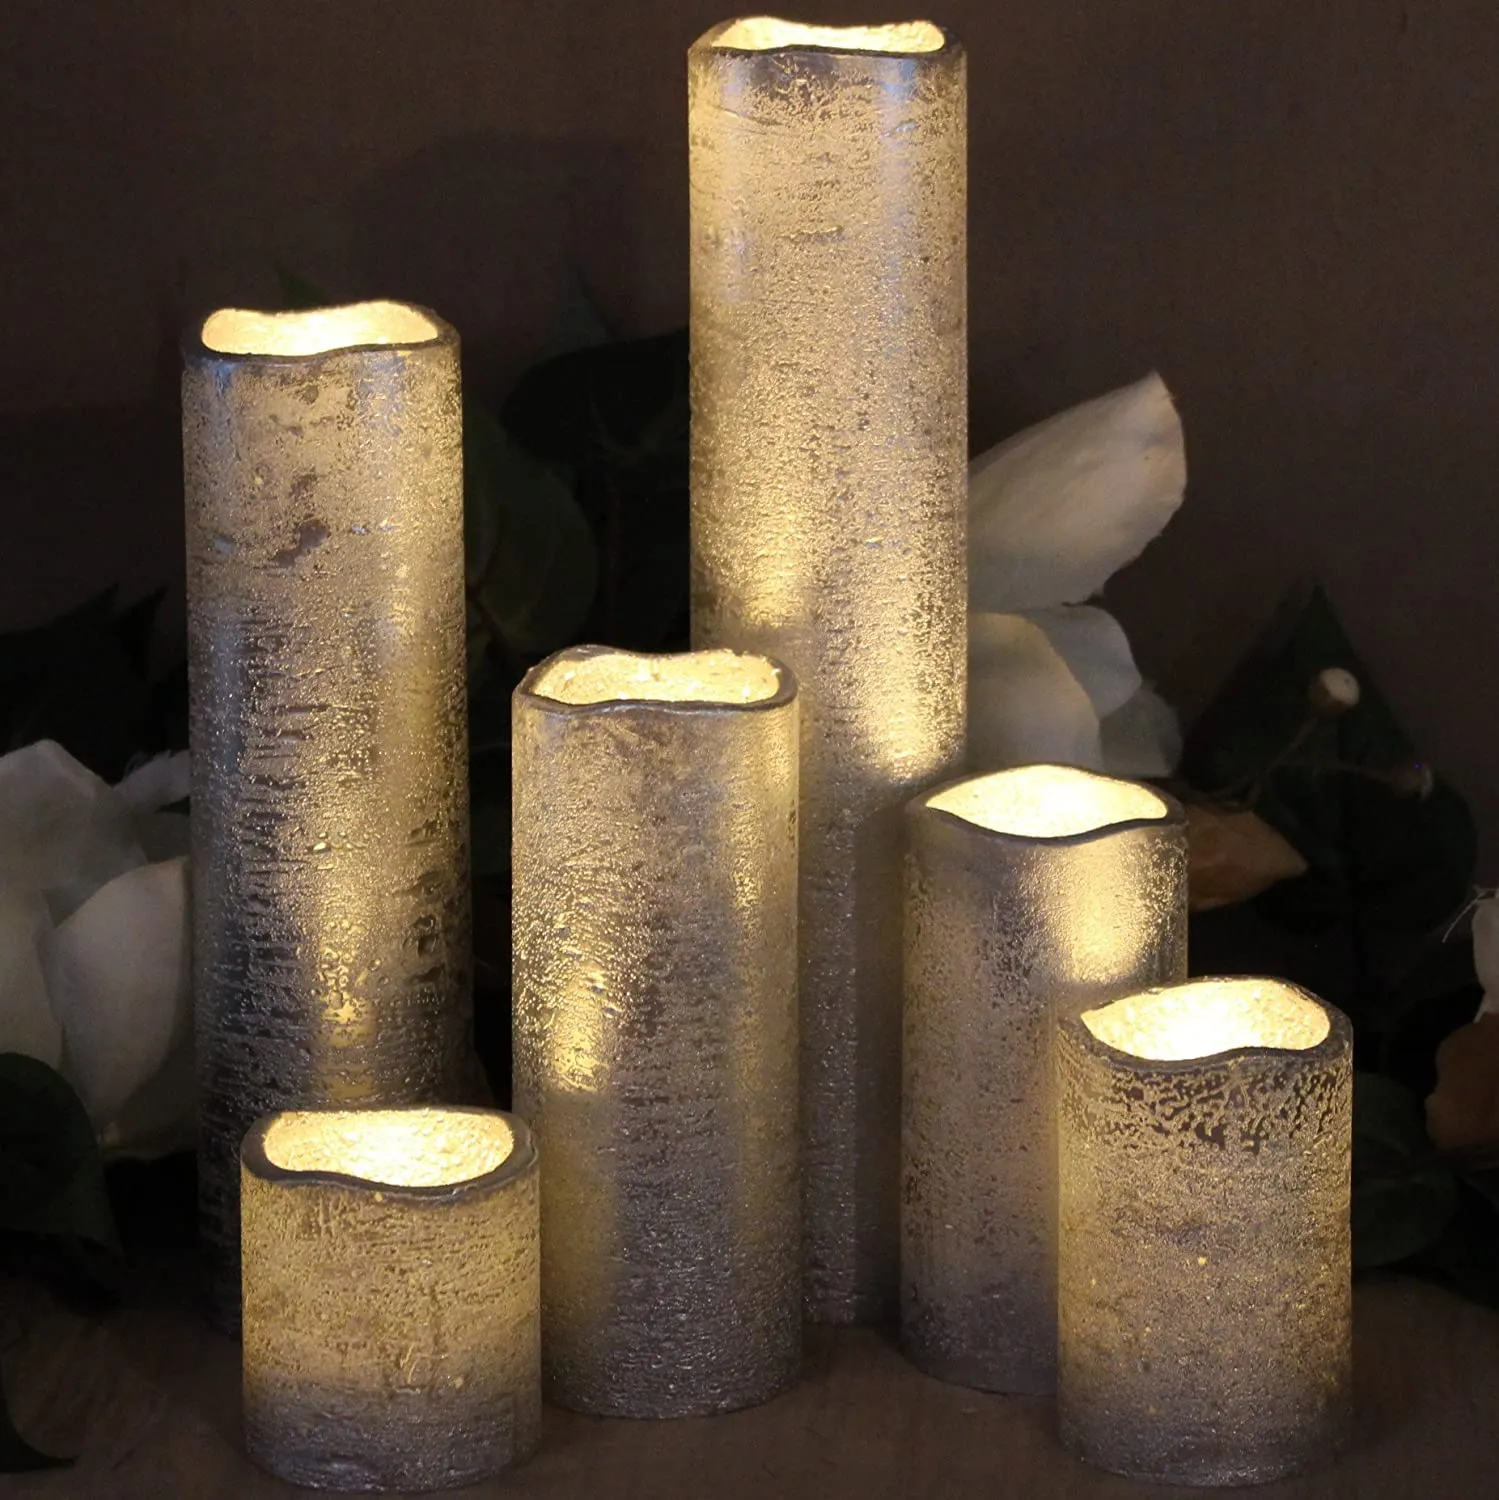 Lytes Flameless Timer LED Candles - christmas office decor ideas on a budget